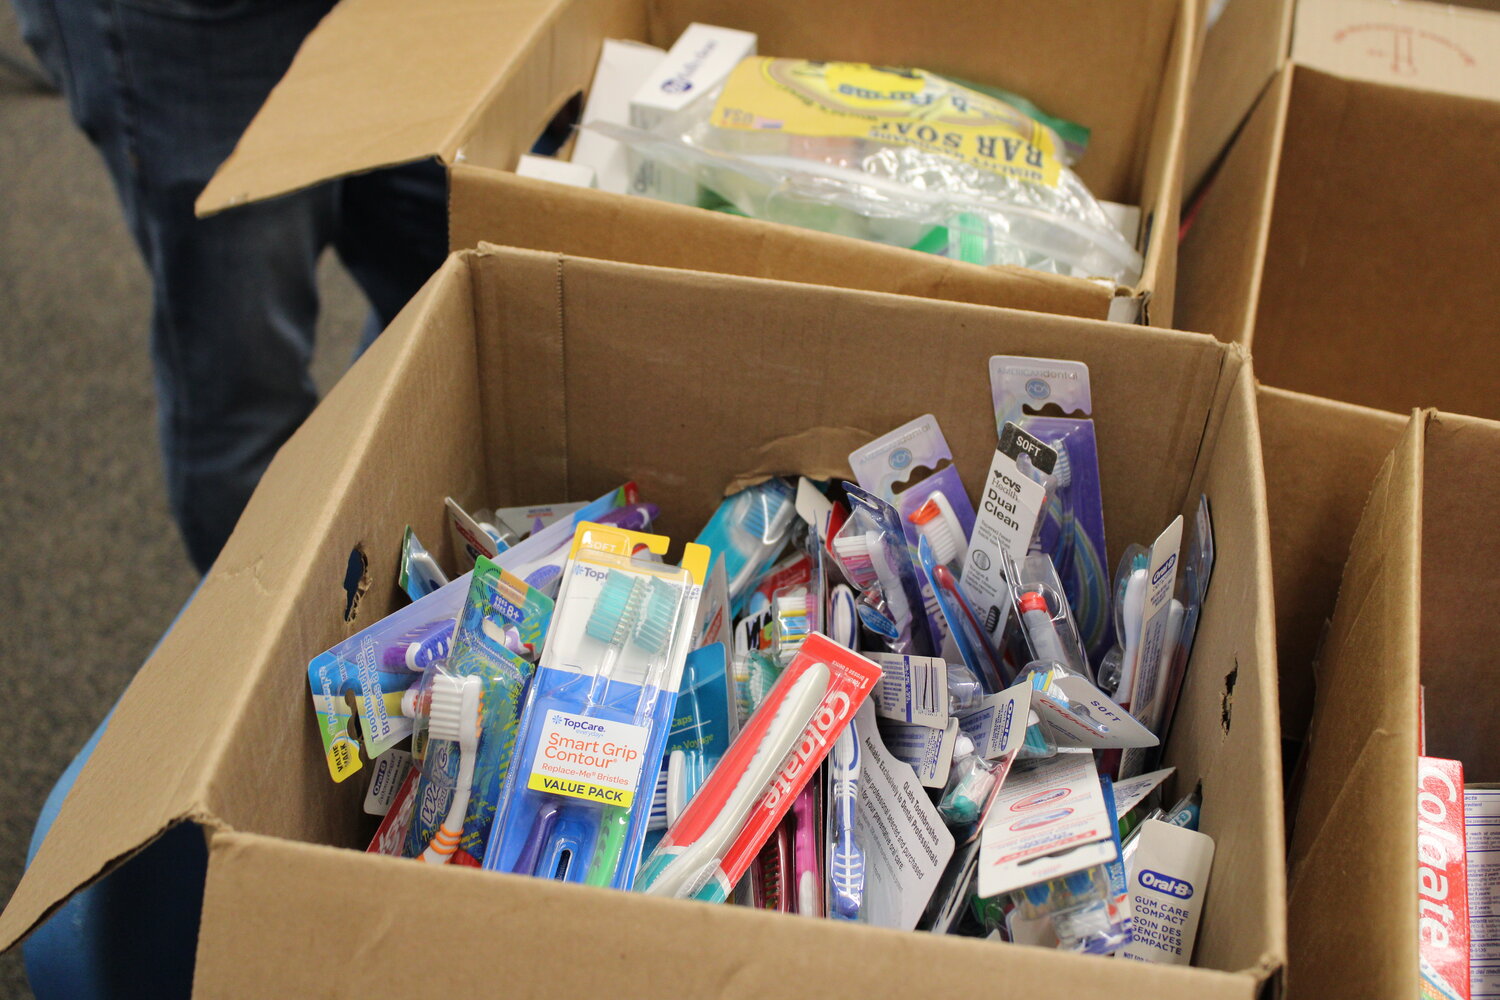 This detail shot shows several donated toothbrushes that will be given to homeless veterans.